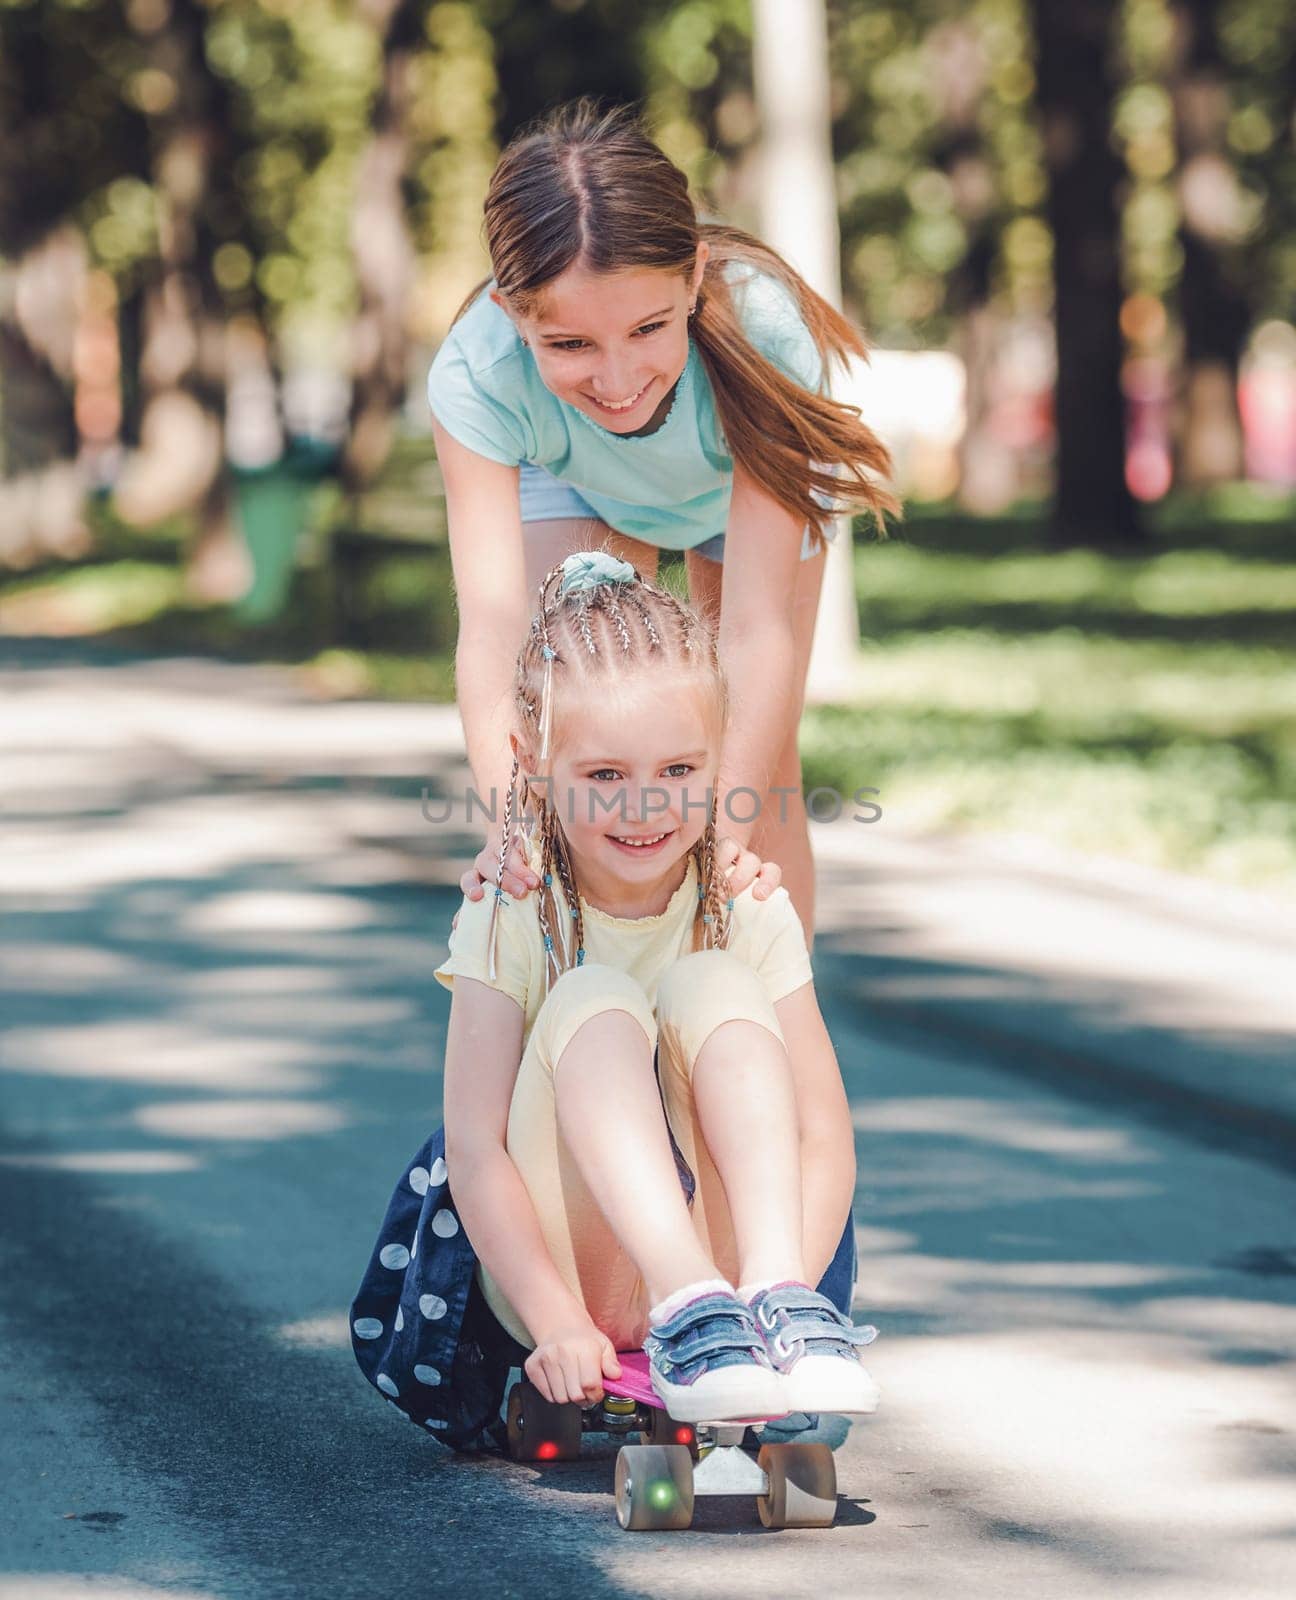 Beautiful teenage girl riding her little blond sister on skateboard in the park.